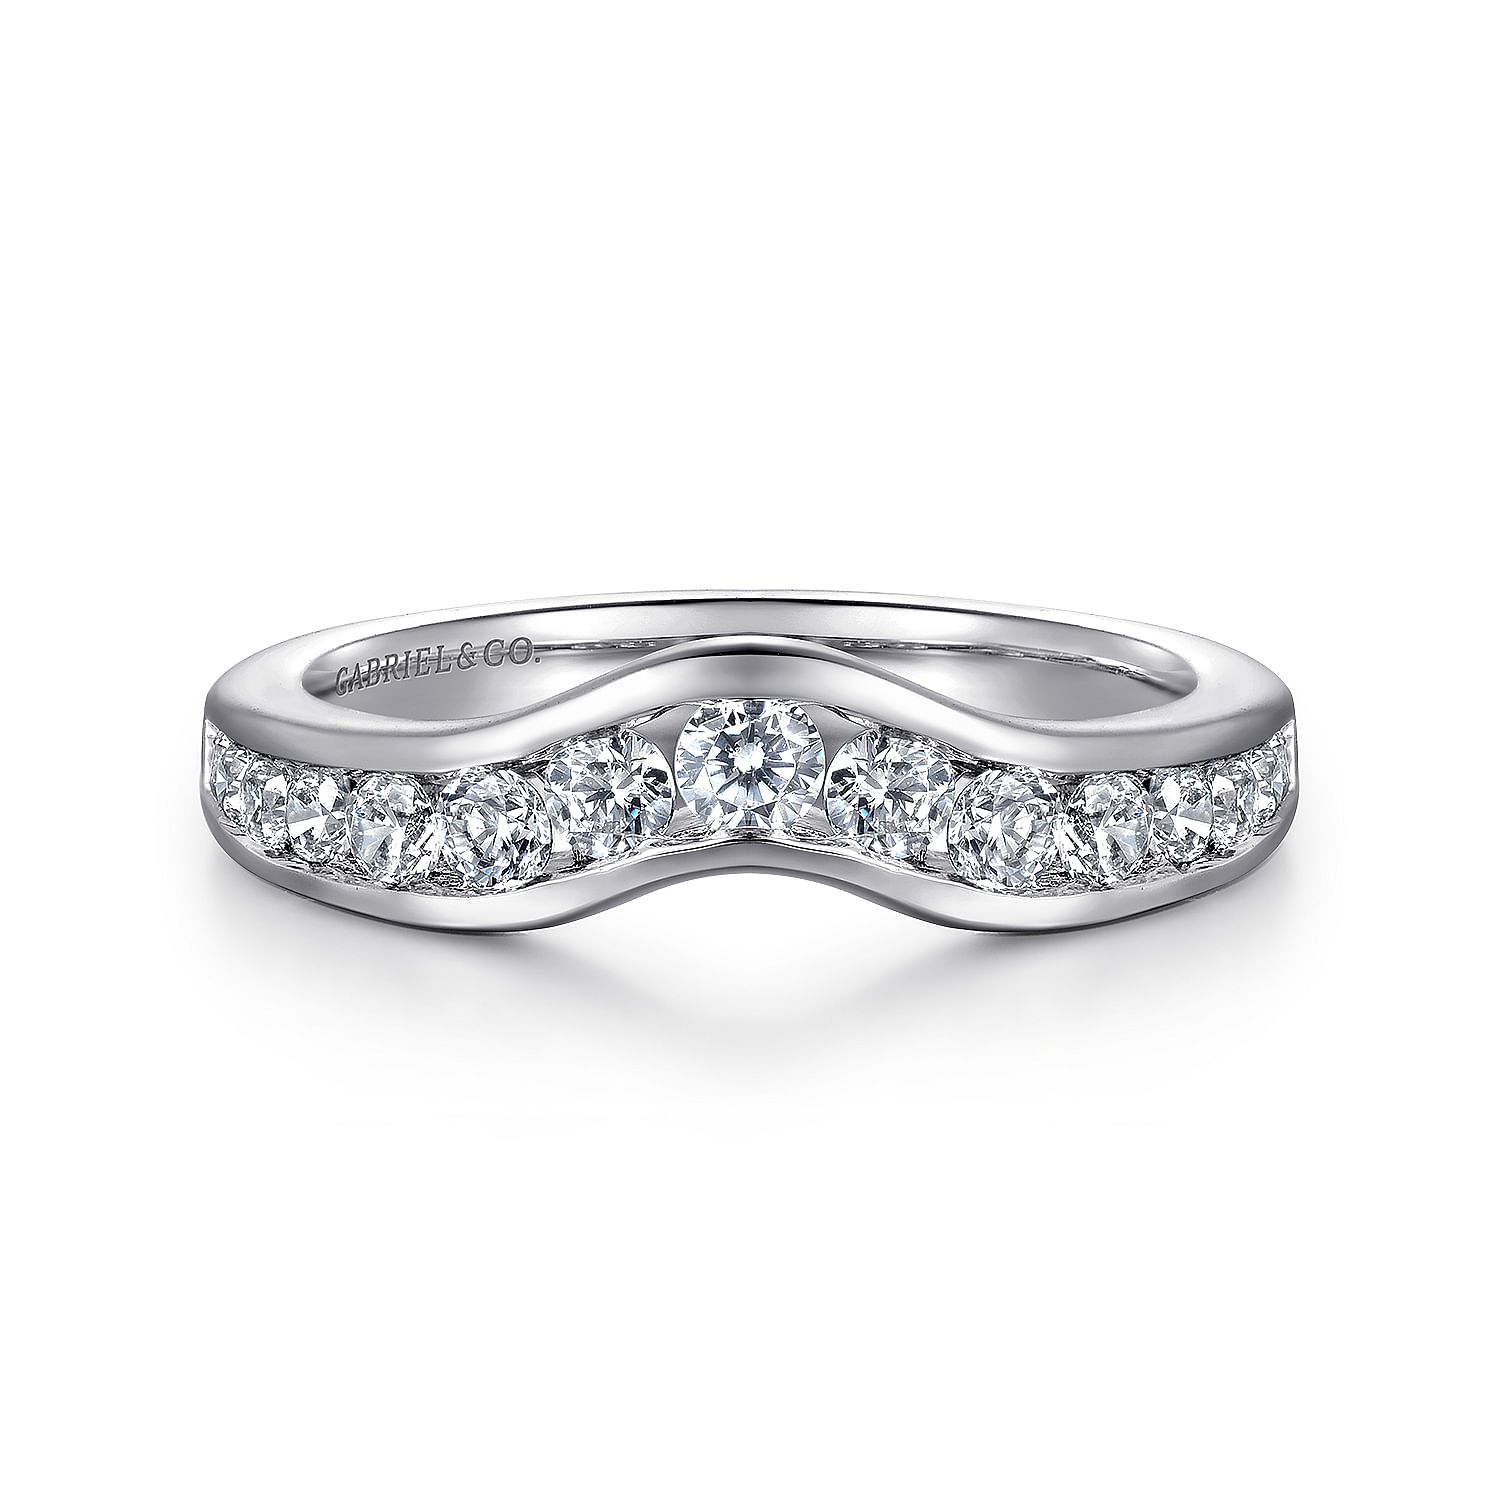 Curved 14K White Gold Channel Set Diamond Wedding Band